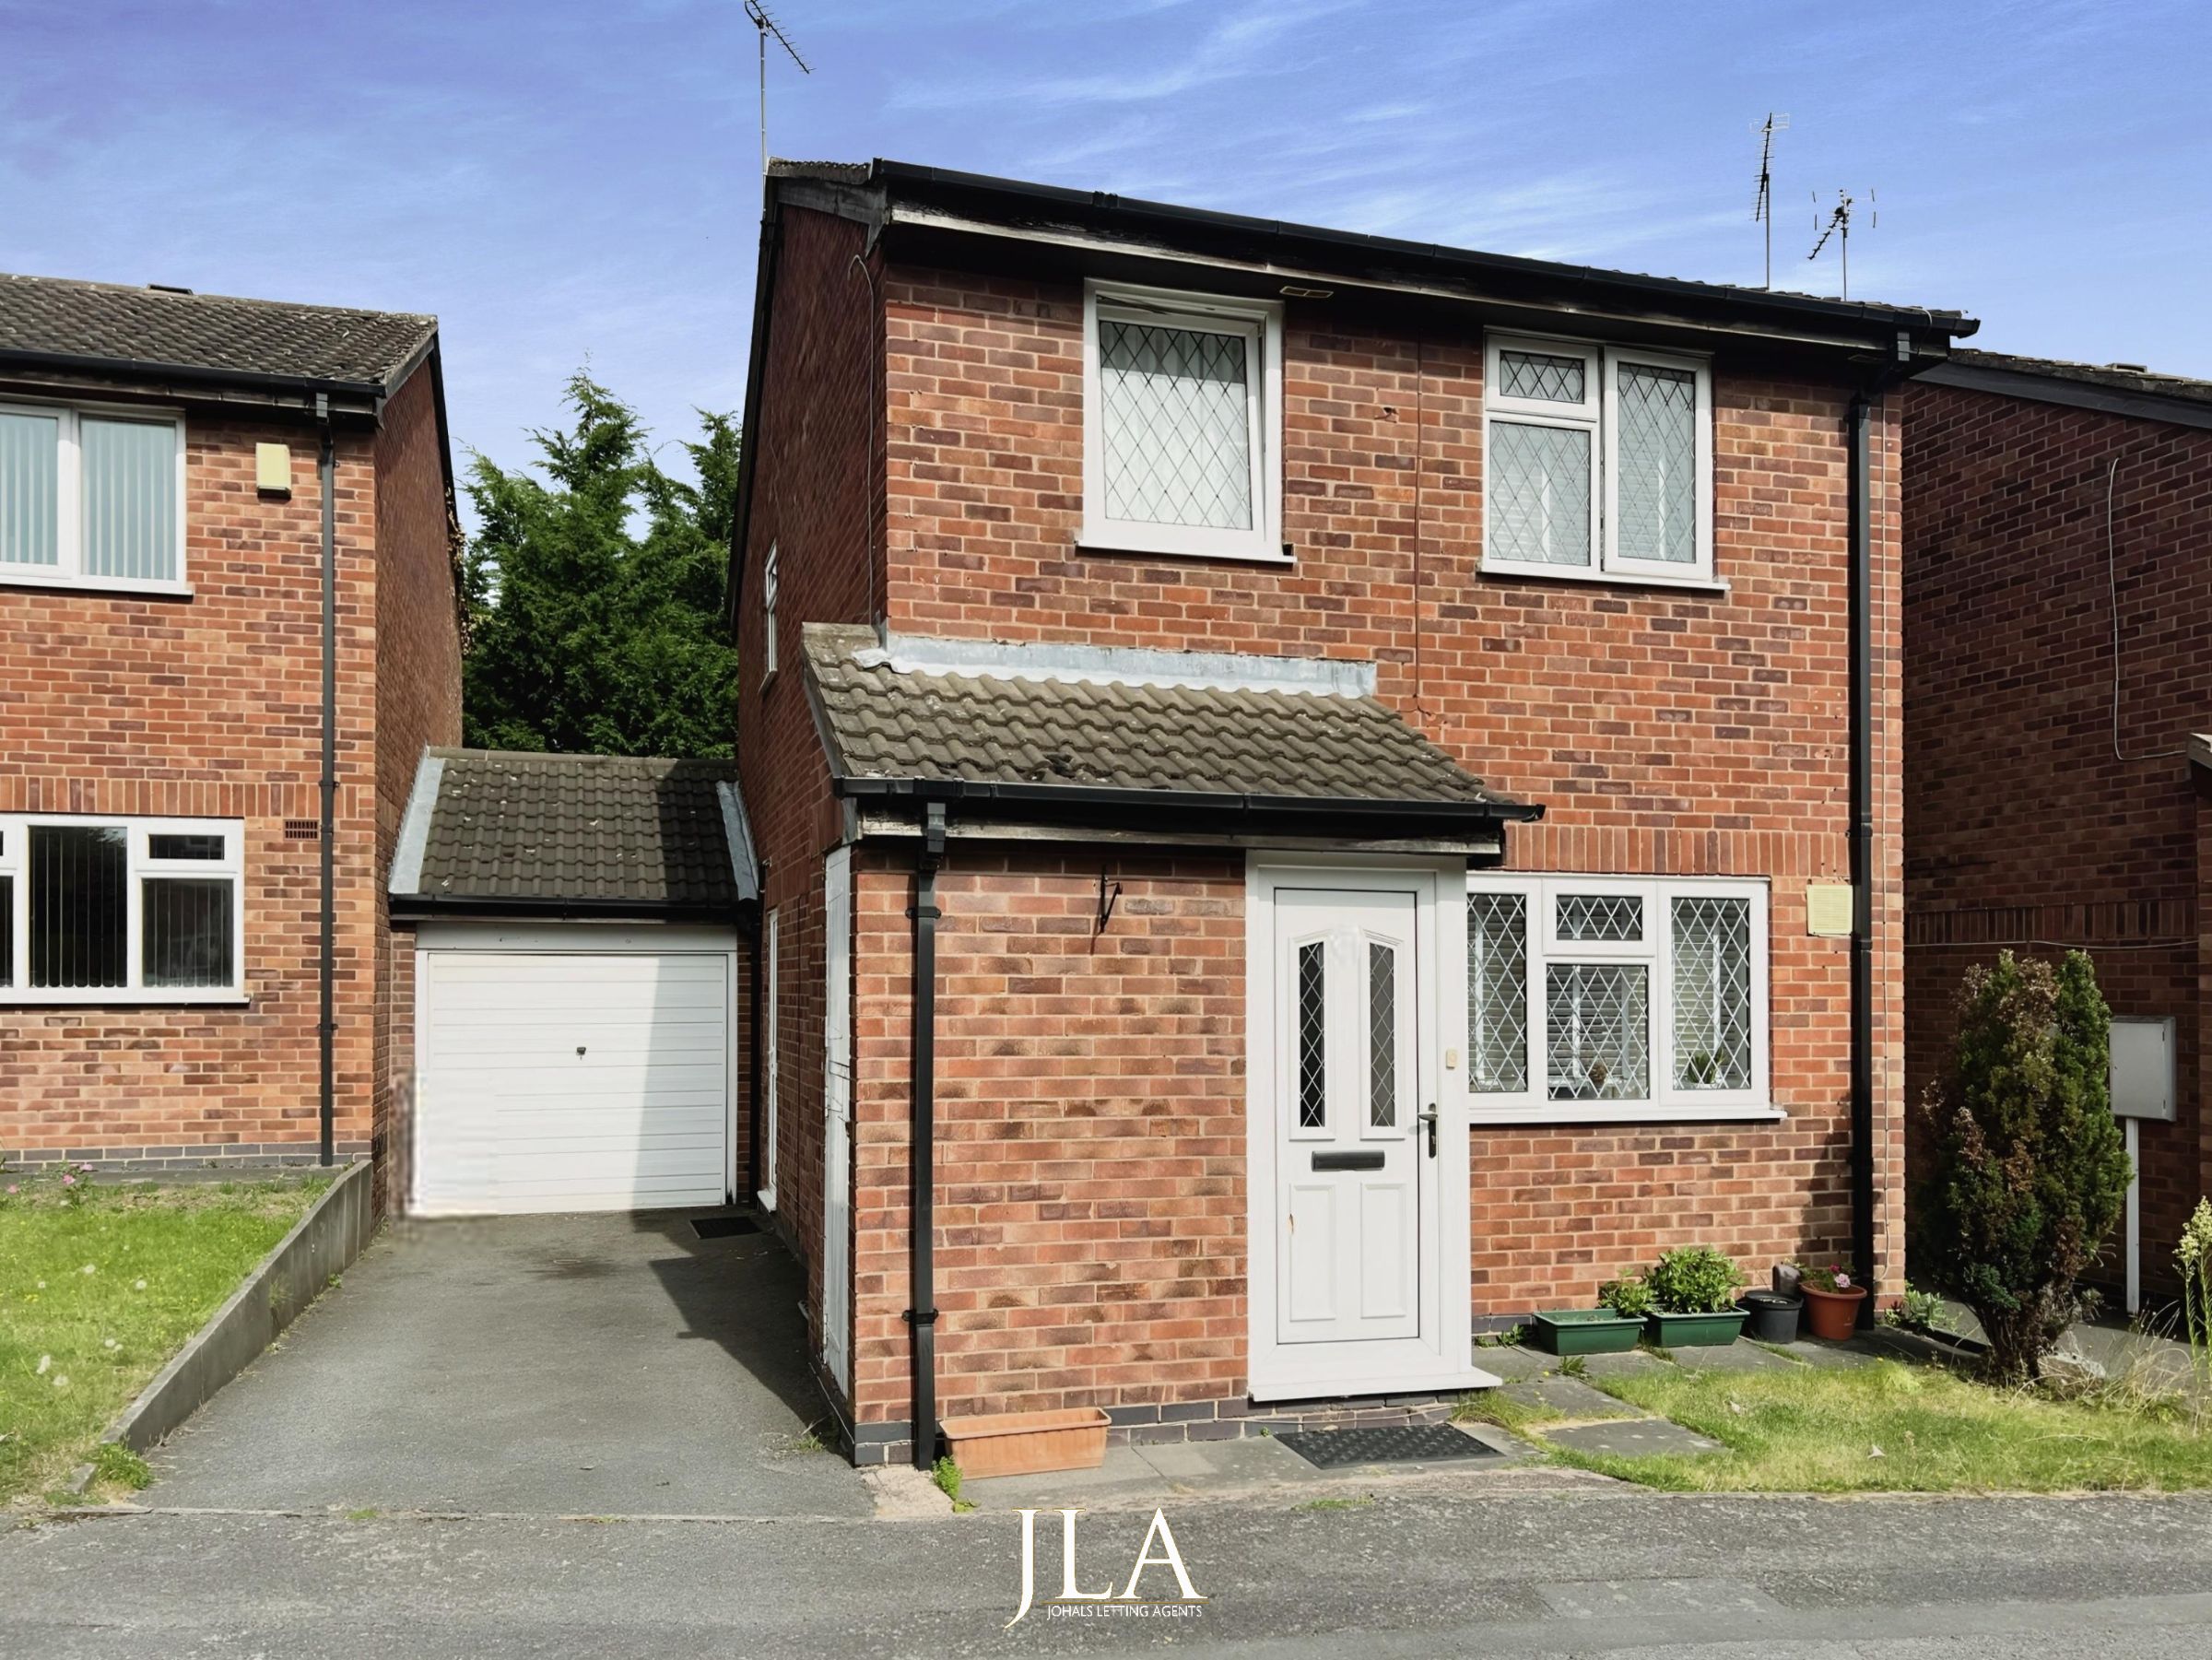 3 bed detached house to rent in Sandhurst Close, Leicester, LE3 